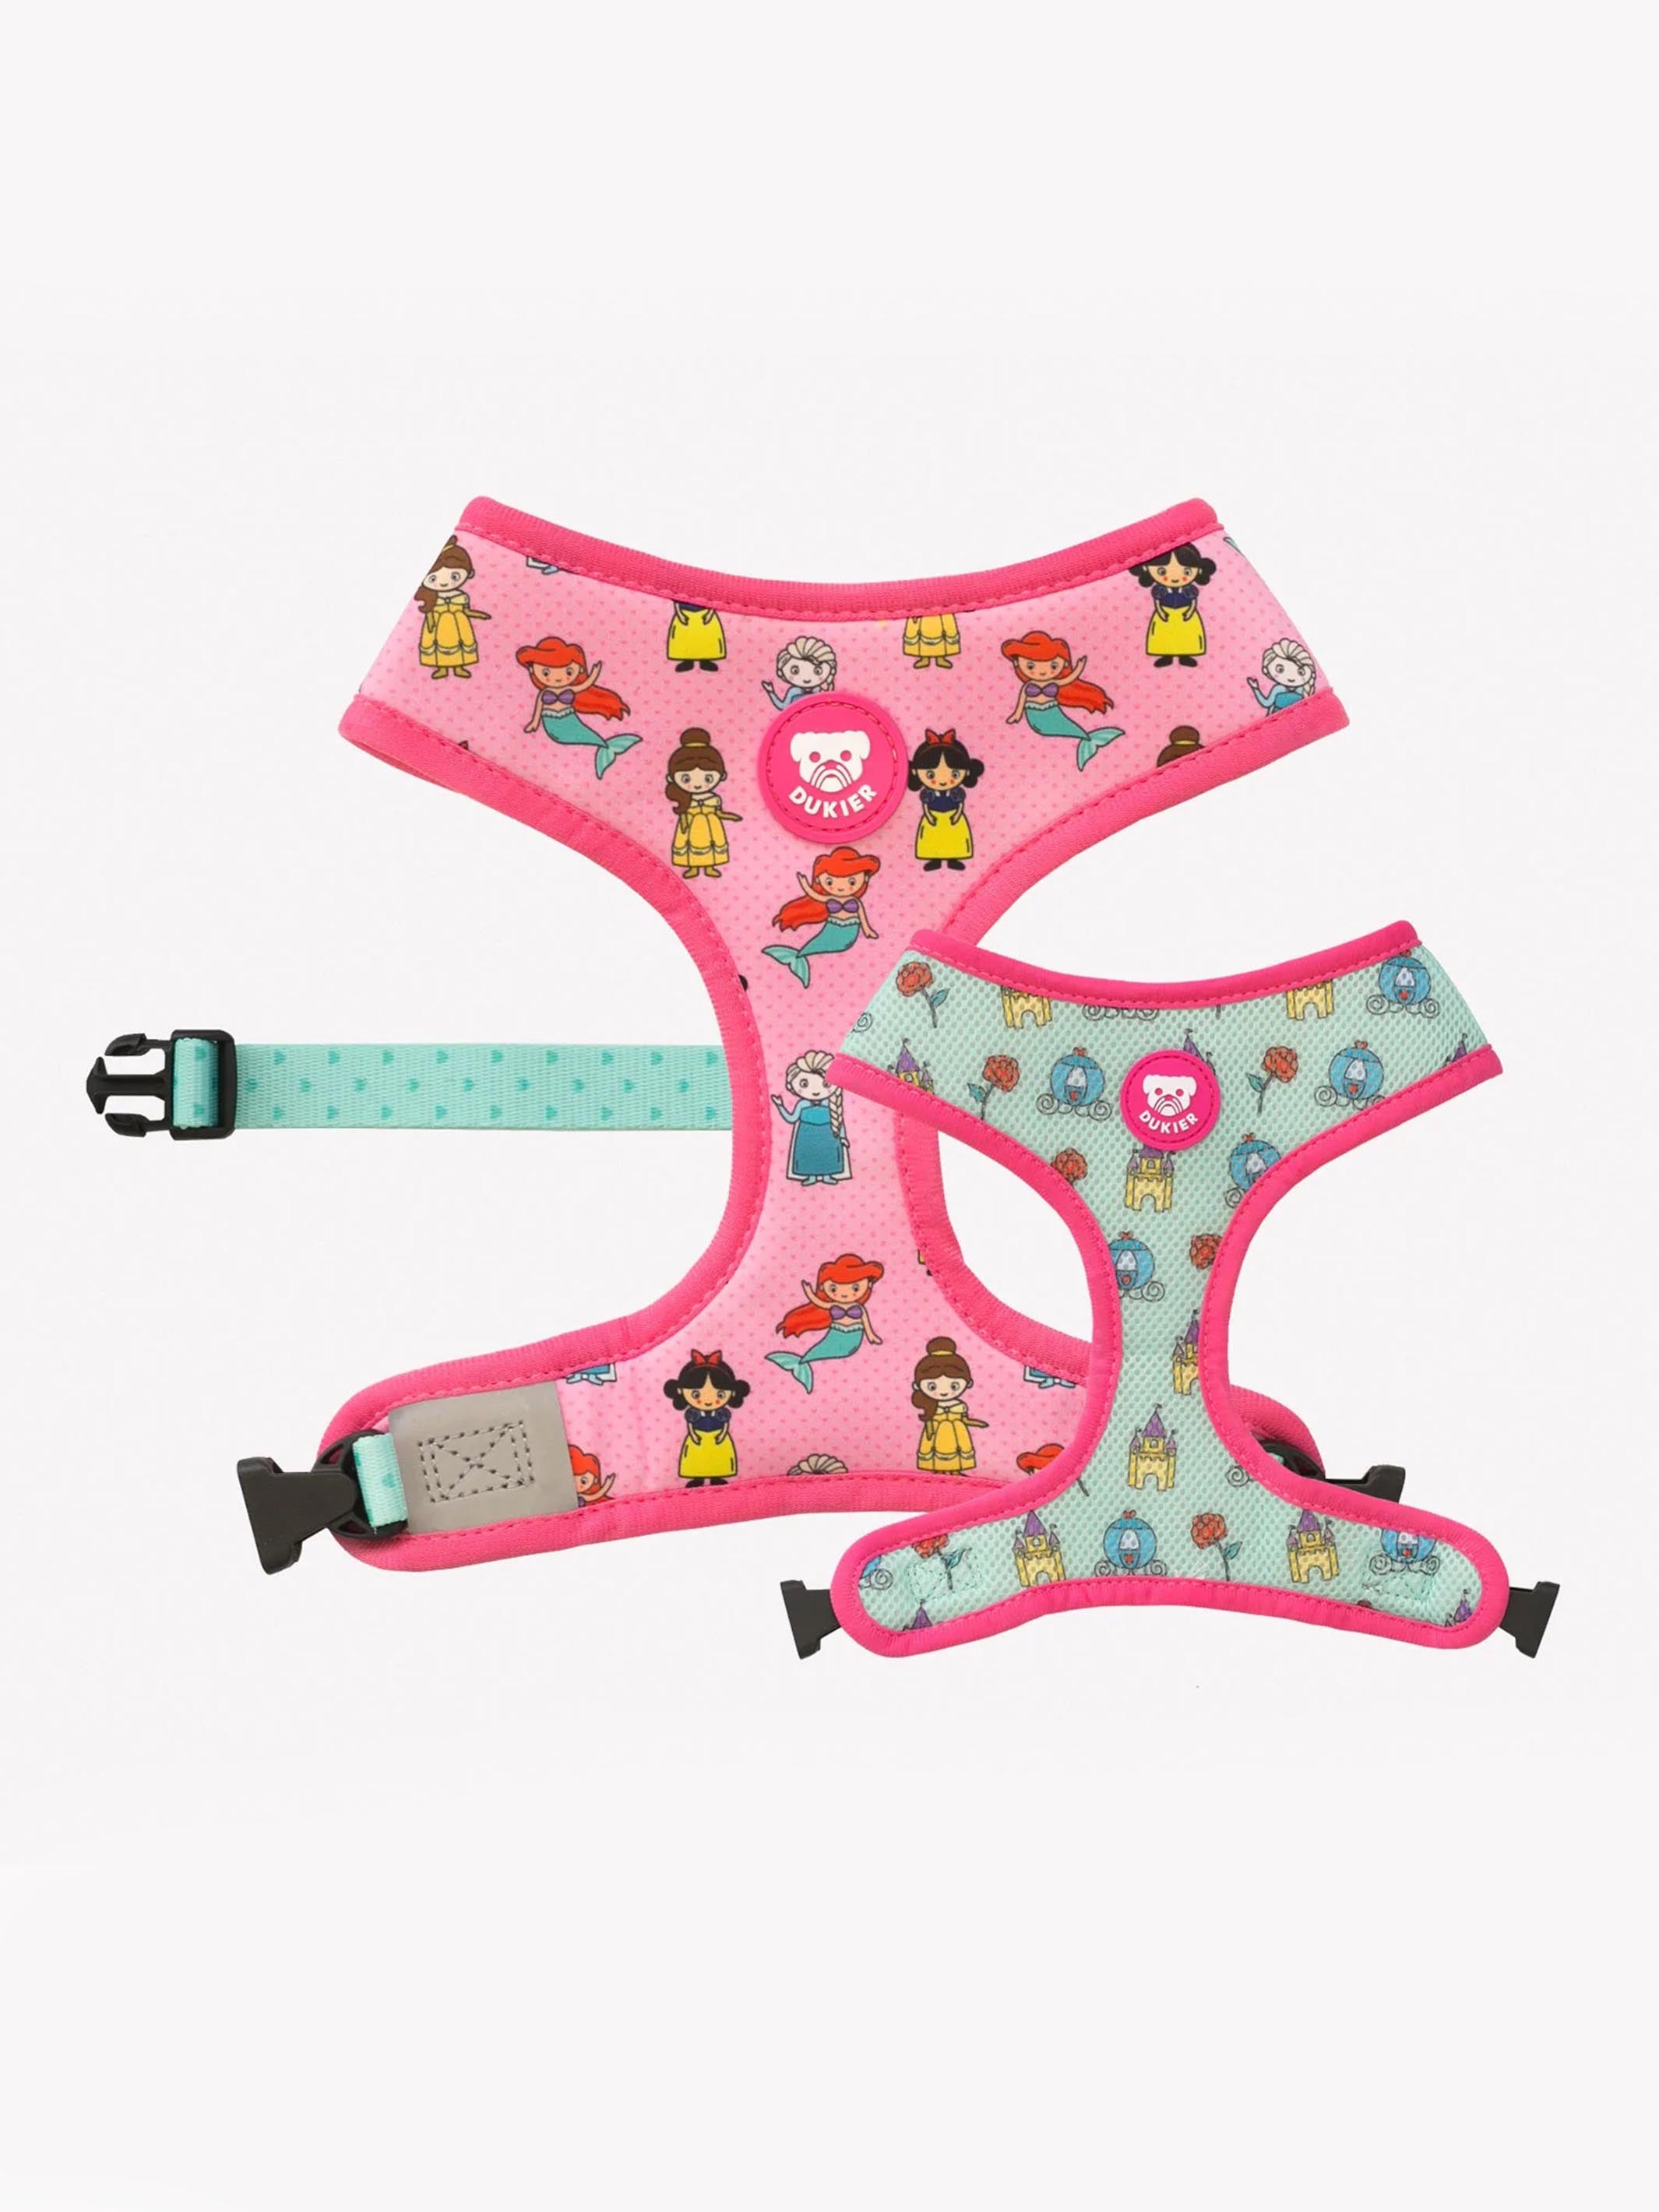 REVERSIBLE PRINCESS HARNESS FOR DOGS